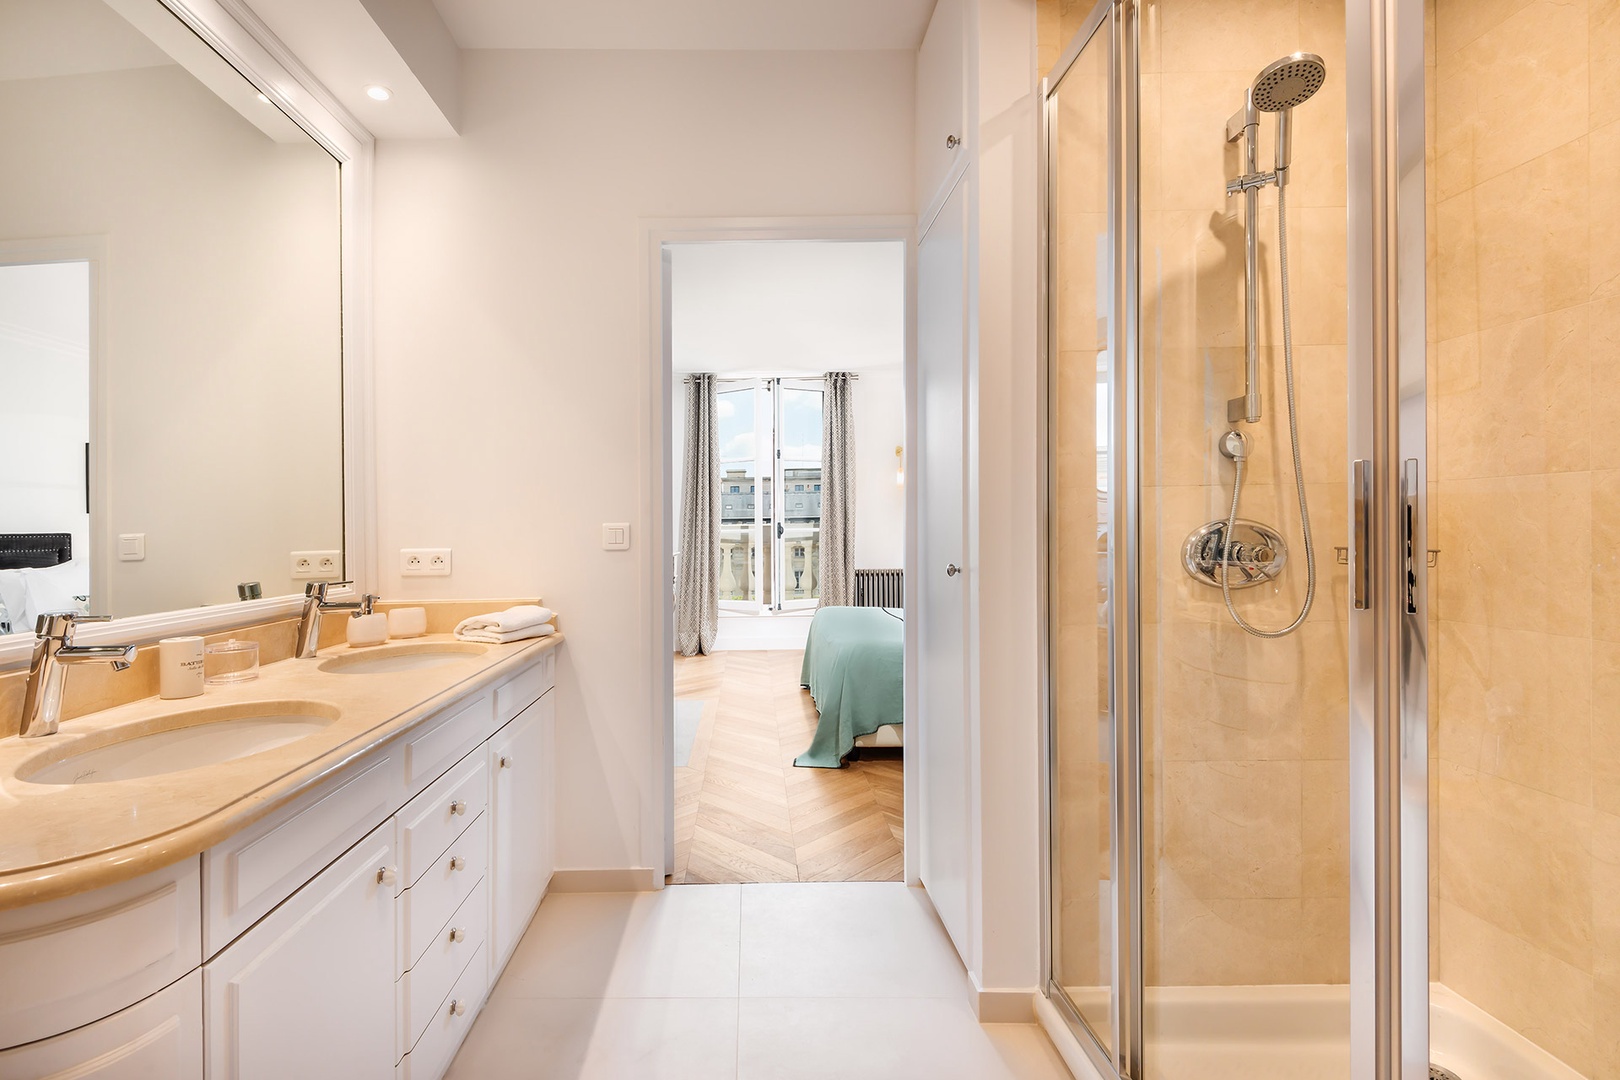 Start your day with an energizing shower in this sleek space.